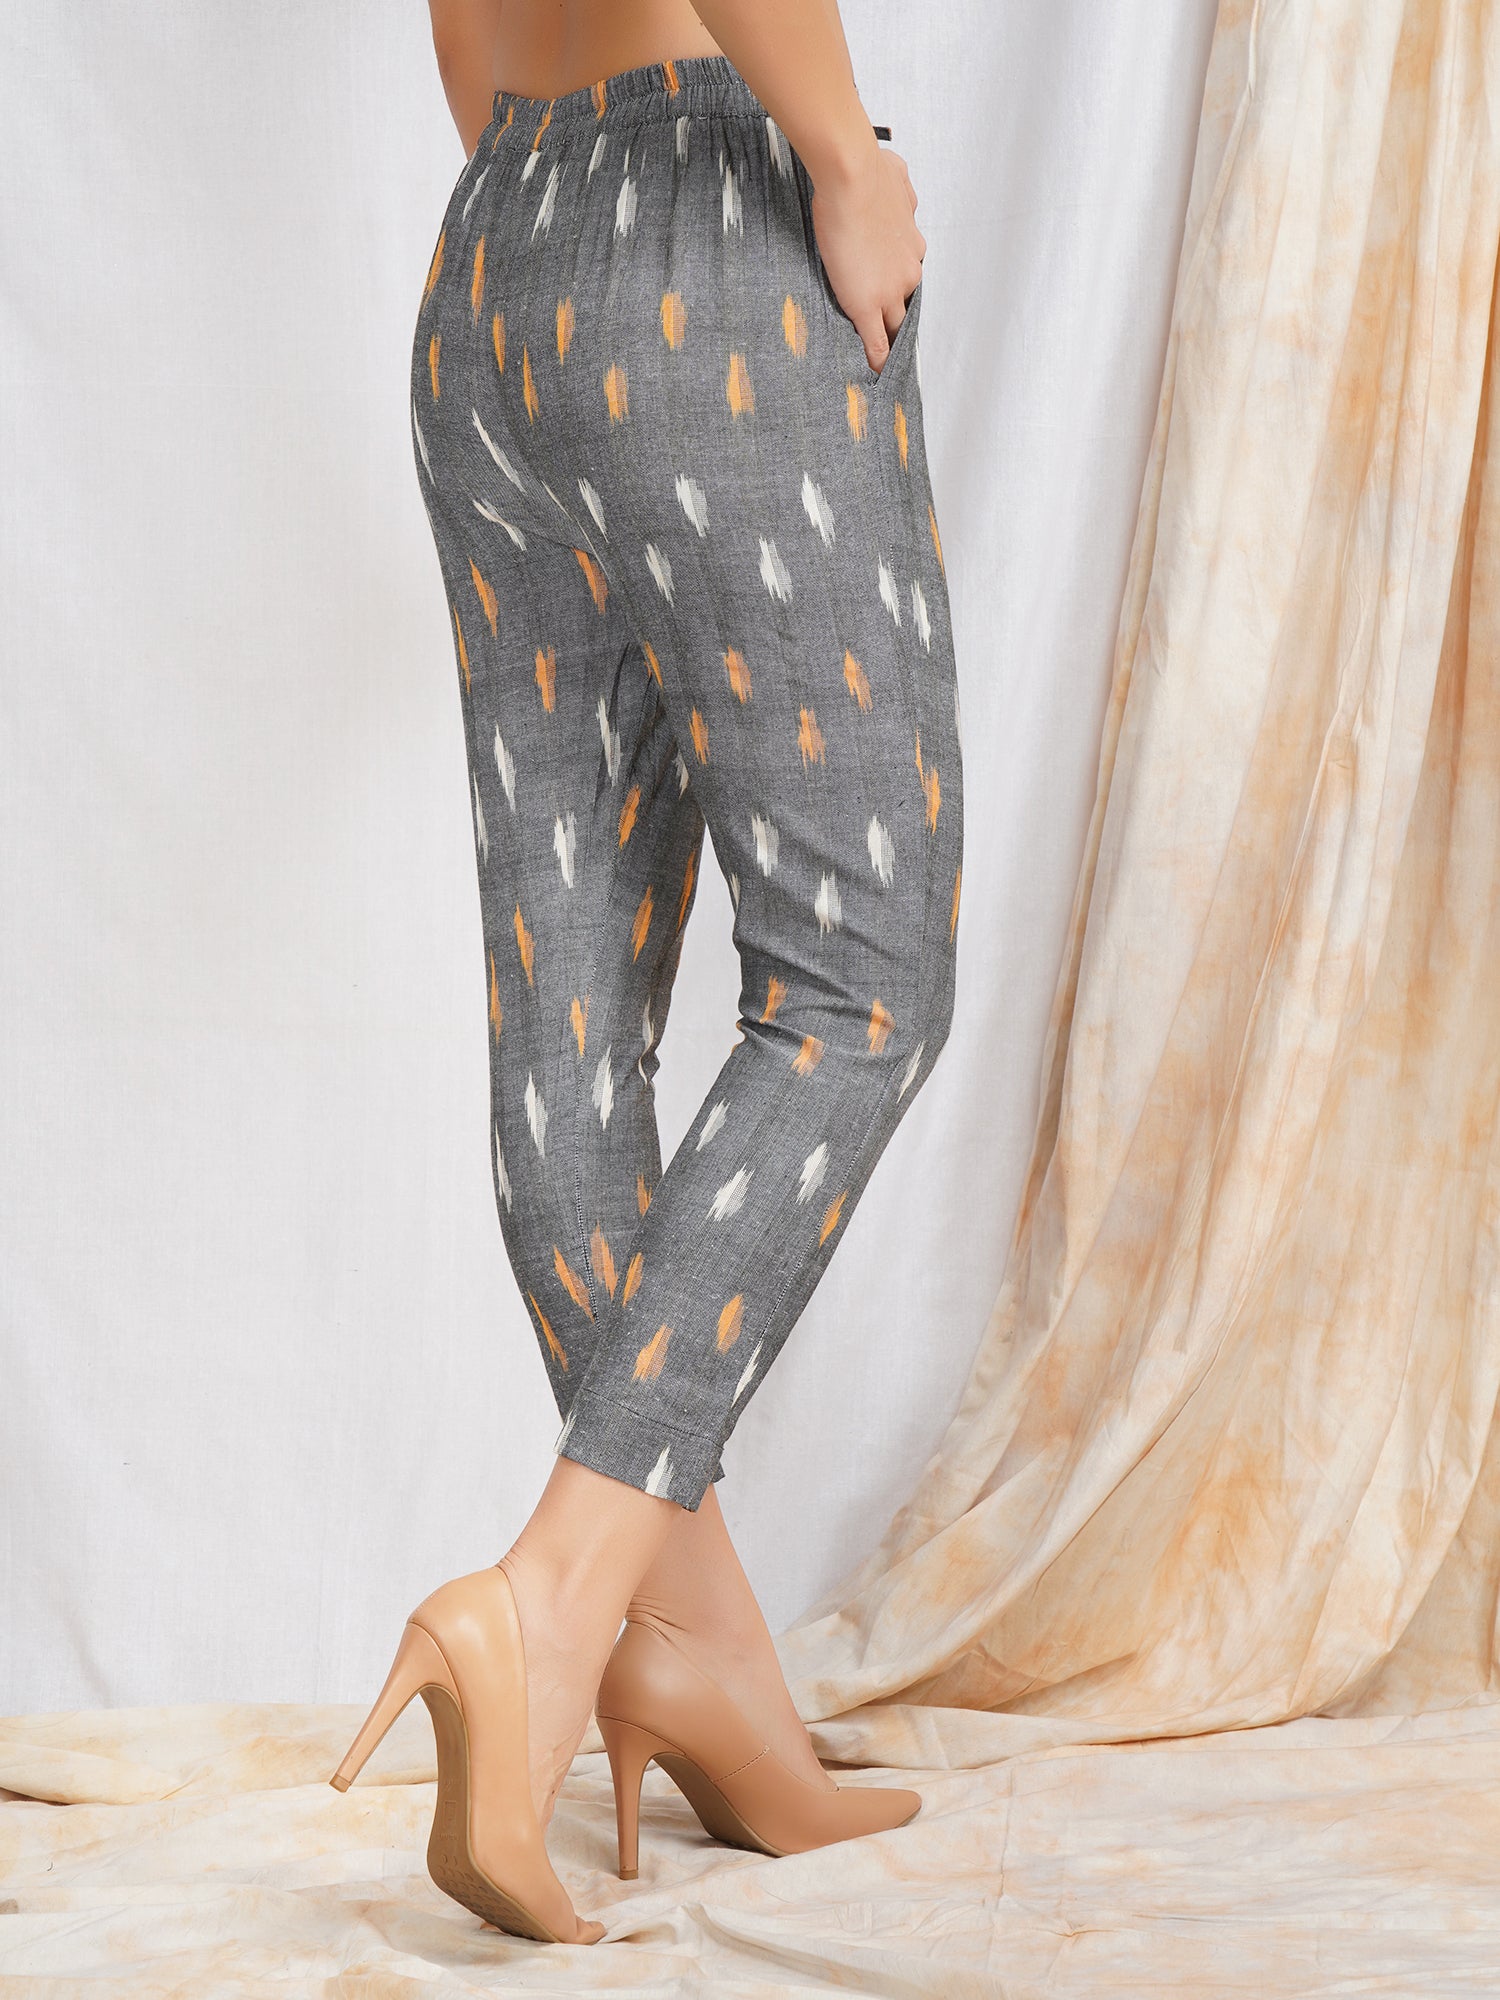 ETHNIC PANT COTTON BOTTOM WEAR PANTS BUY ONLINE AT BEST RATE WHOLESALE IN  INDIA - textiledeal.in